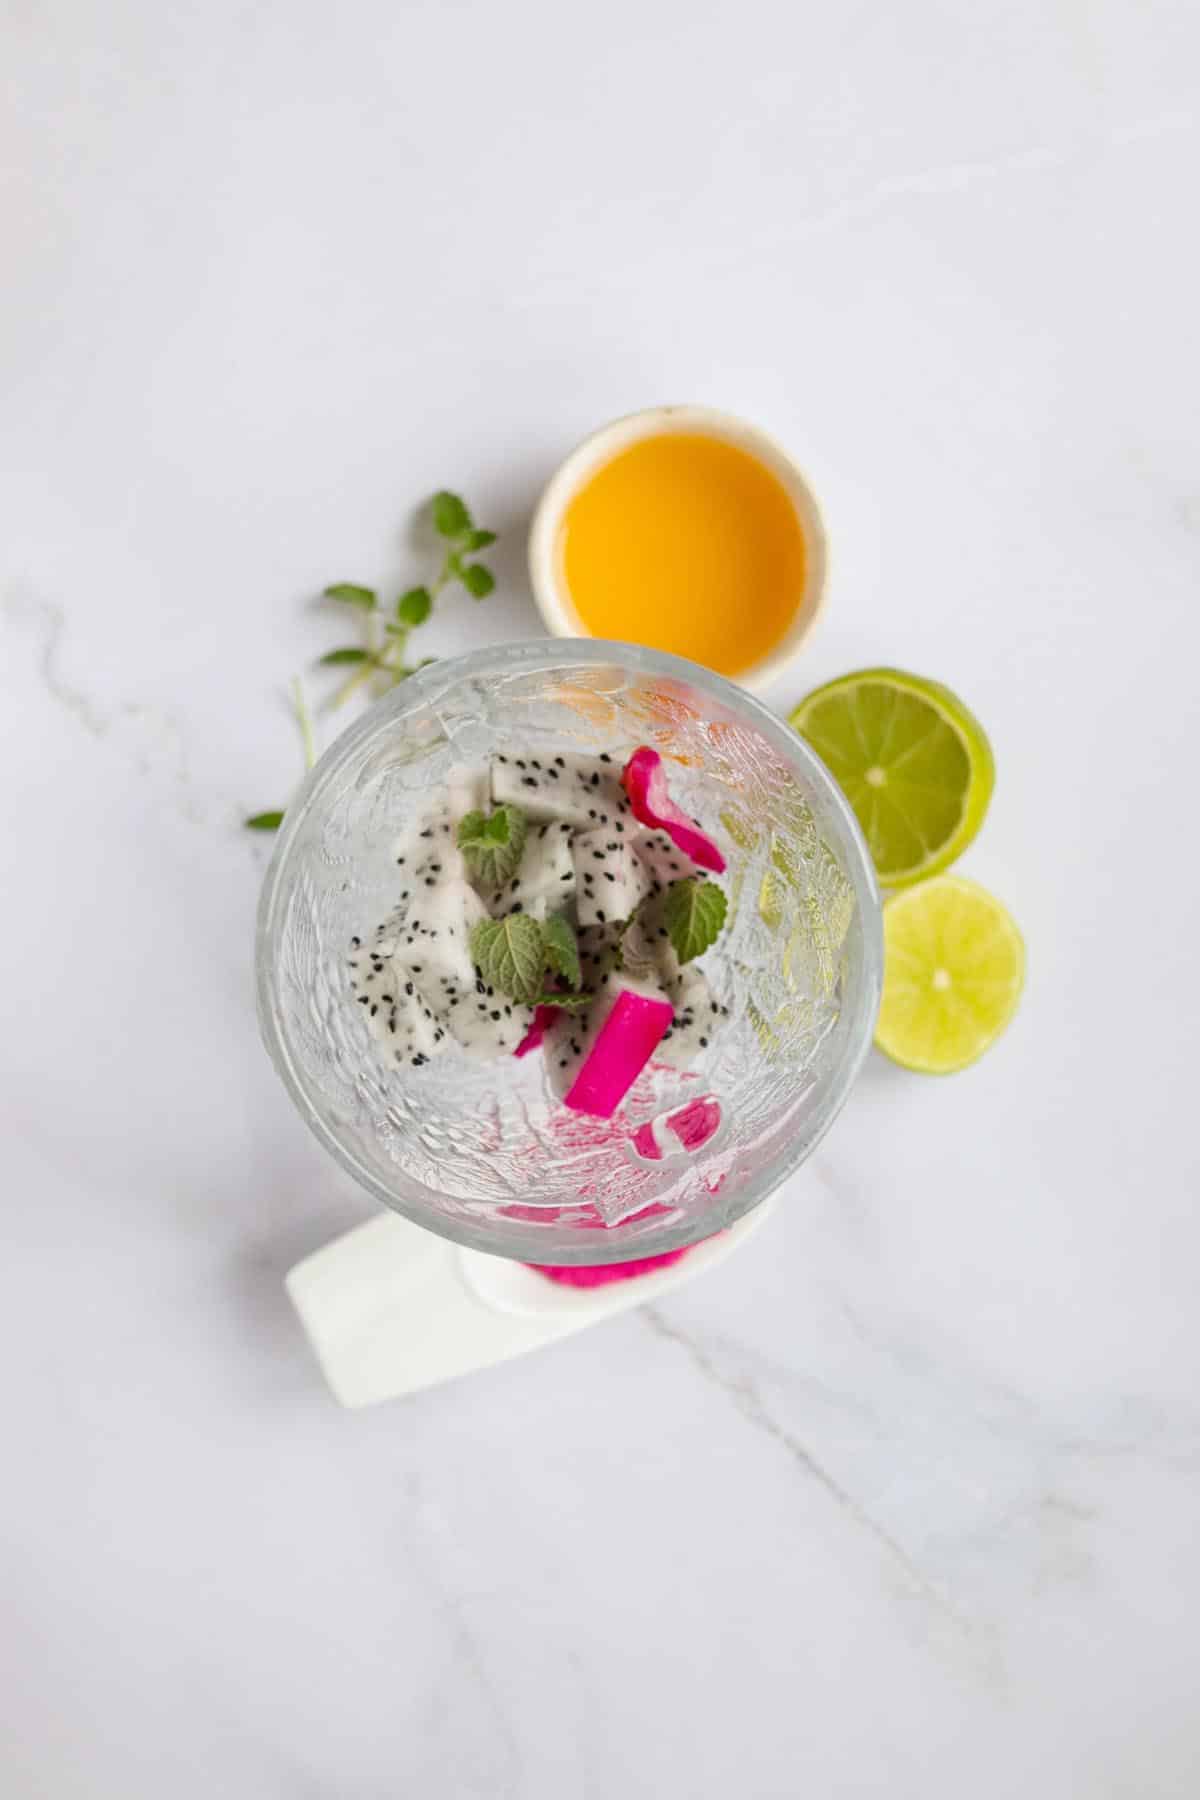 Dragon fruit, and mint in a glass.